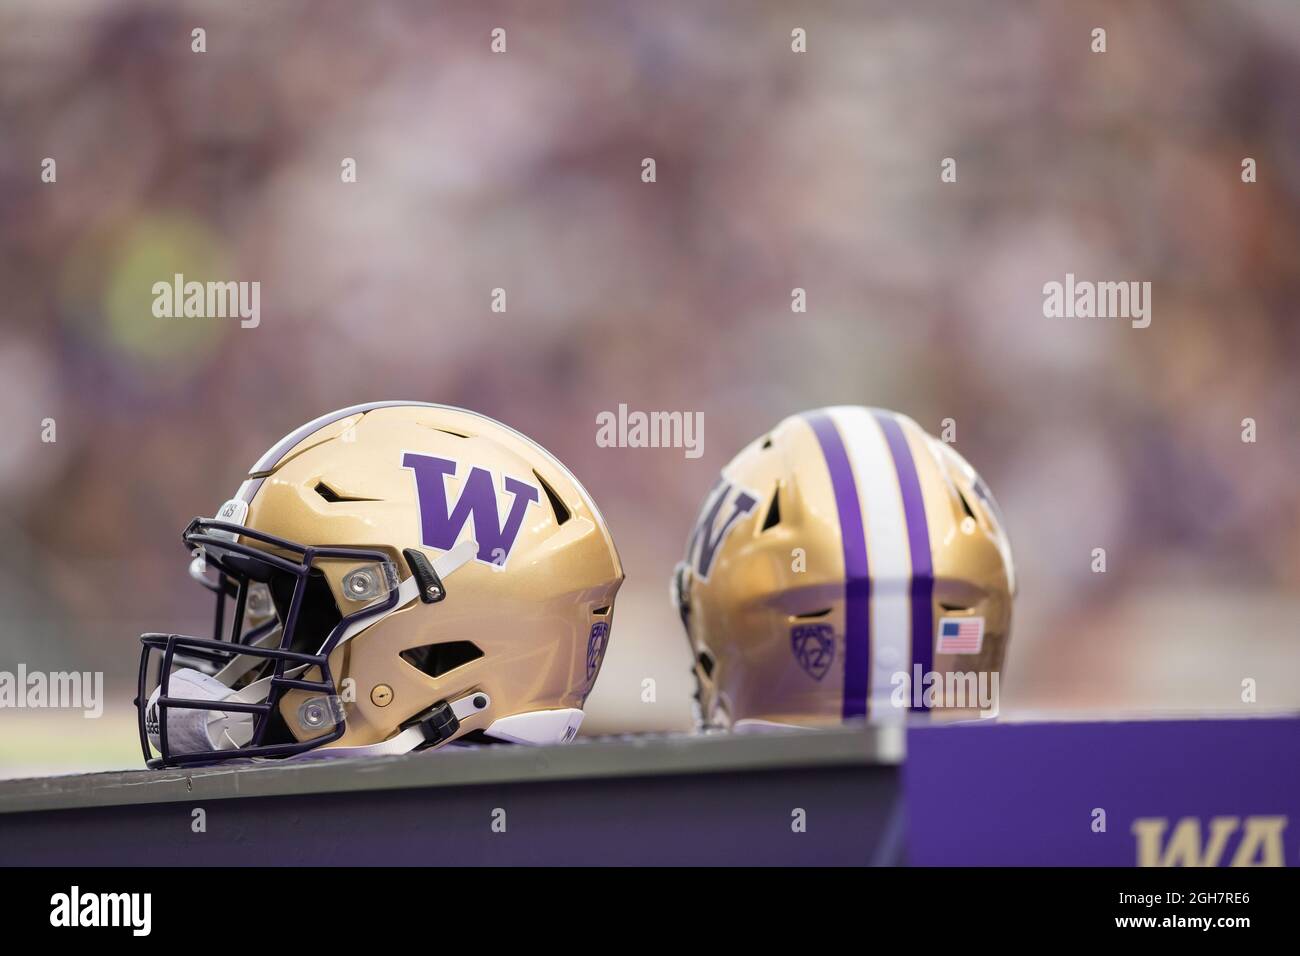 Washington Huskies helmets along the sideline during the first quarter of an NCAA college football game against the Montana Grizzlies, Saturday Septem Stock Photo